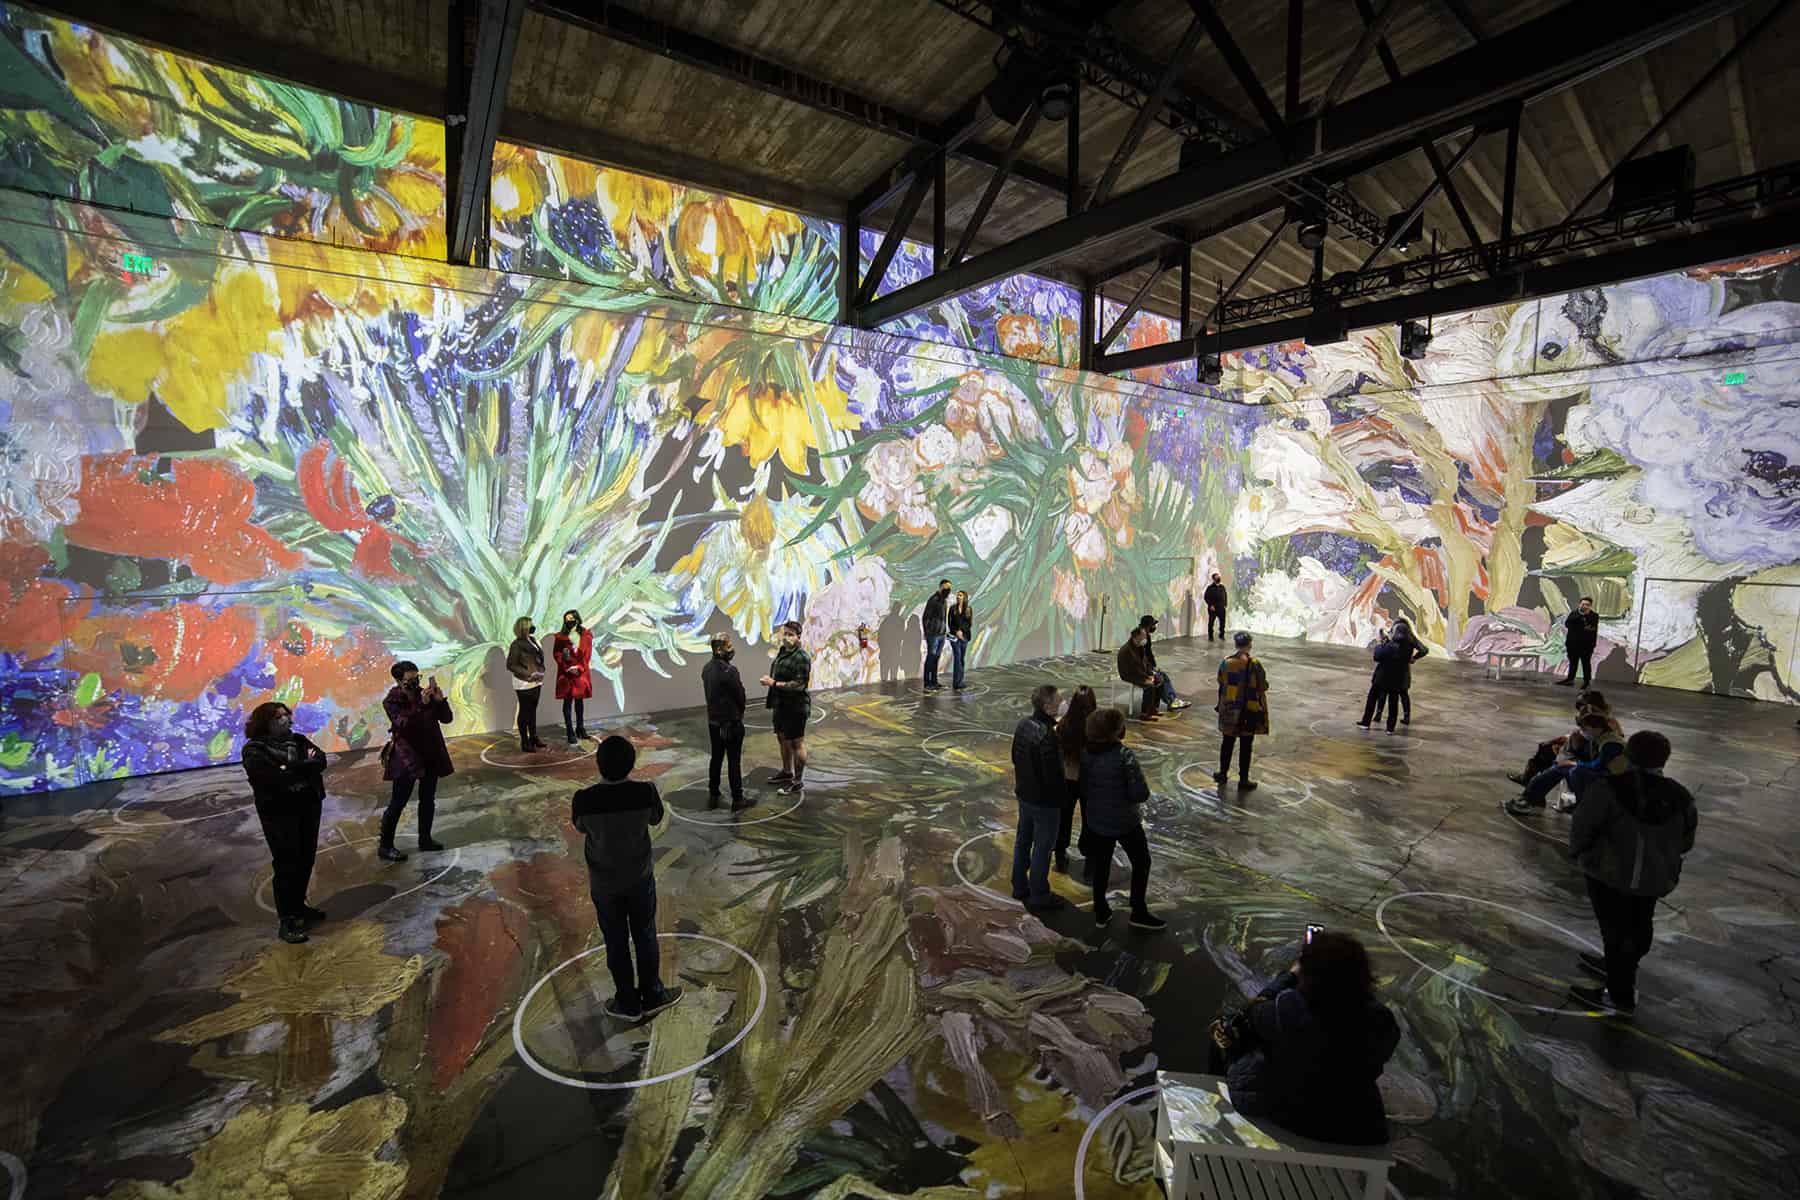 promotional image for the "Immersive Van Gogh" exhibit in San Francisco